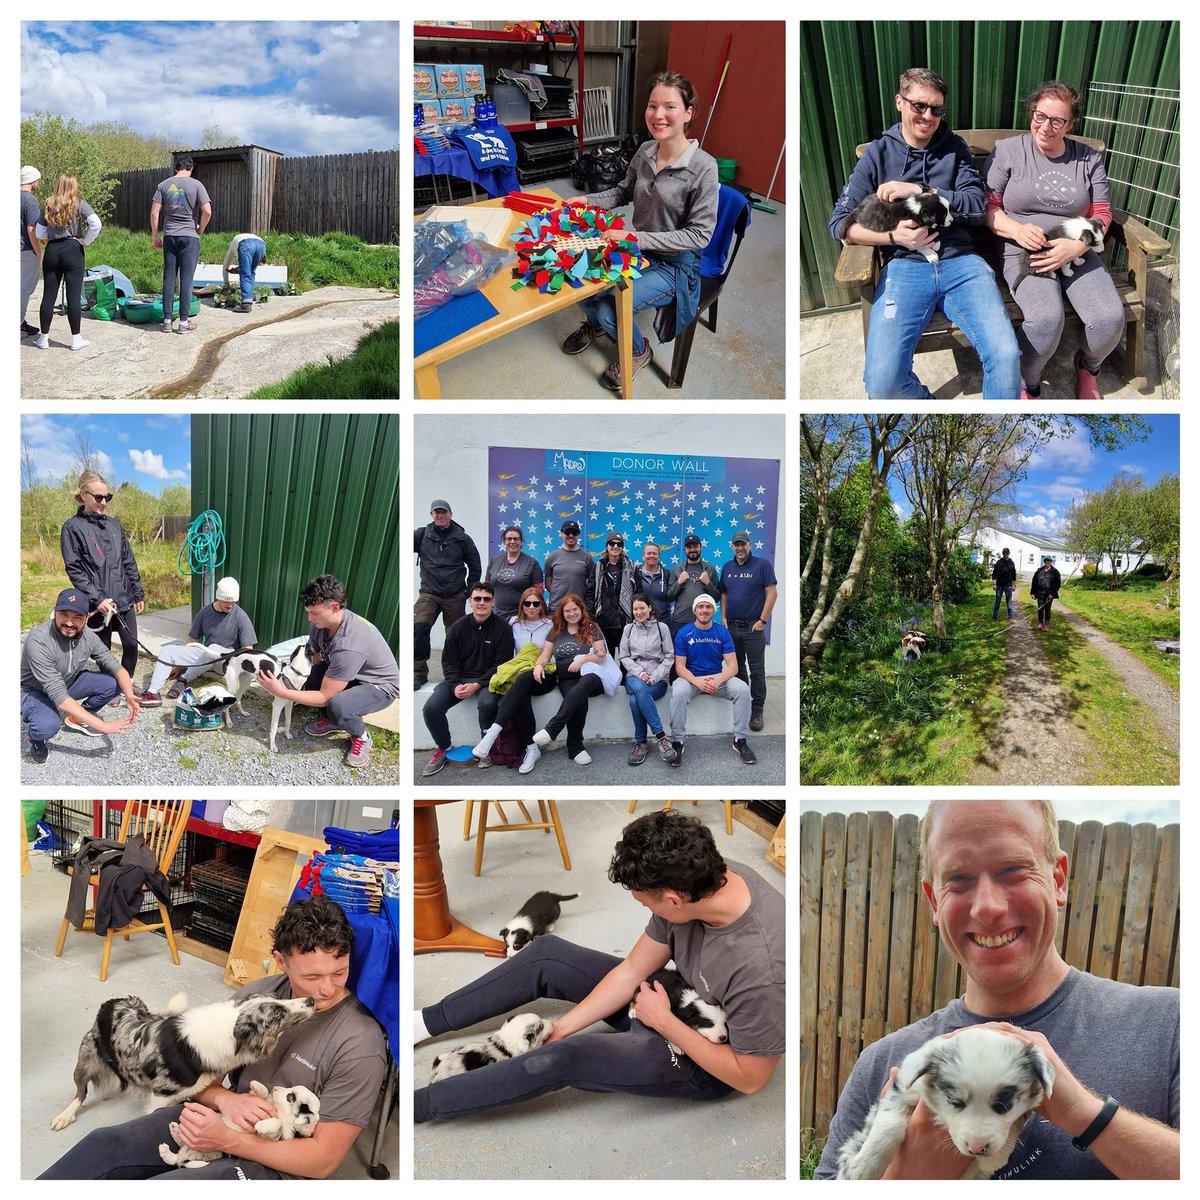 Such a productive day at kennels with corporate @MathWorks #Galway team They worked so hard- lots of dogs walked and puppies cuddled, the sun shone ☀️ There was lots of laughter and plenty of tired but happy people and dogs! 🐕🙏🏼 #CSR #GivingBack #DogRescue